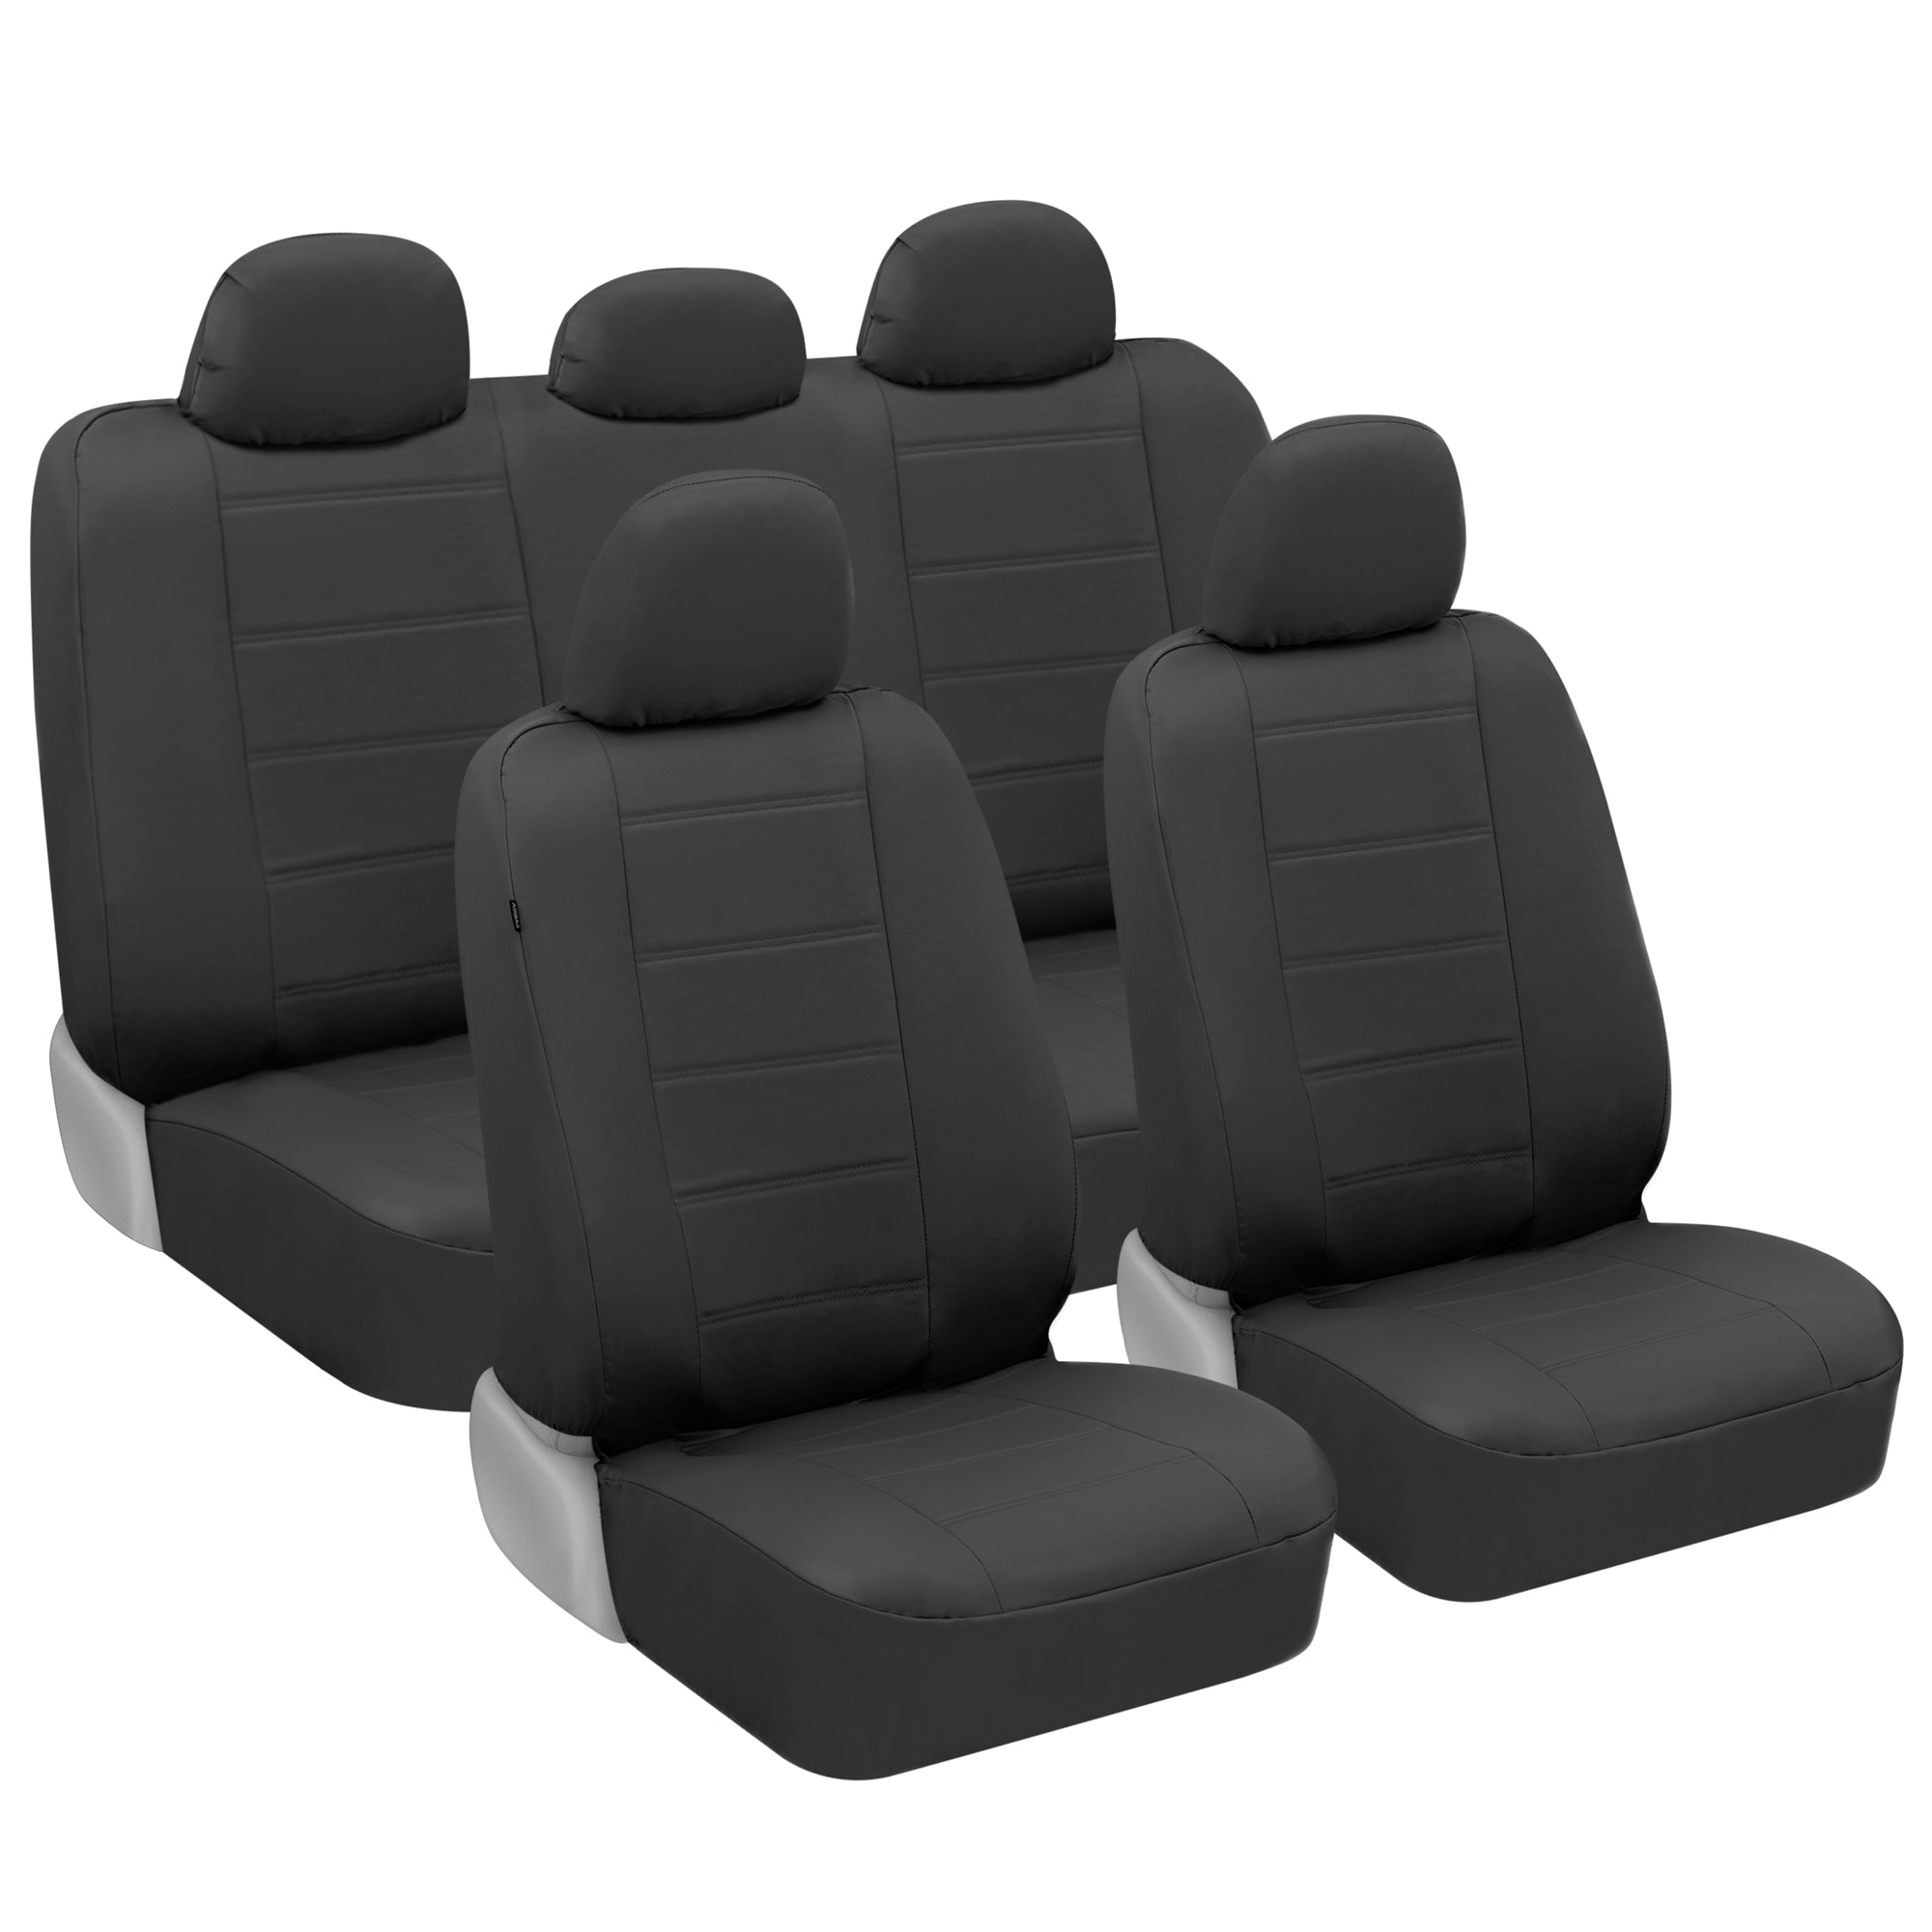 carXS Black Leather Car Seat Covers Full Set, 9-Piece Faux Leather Seat Covers for Cars, Includes Front Seat Covers and Back Car Seat Cover, Automotive Seat Covers for Trucks SUV - Black:#000000